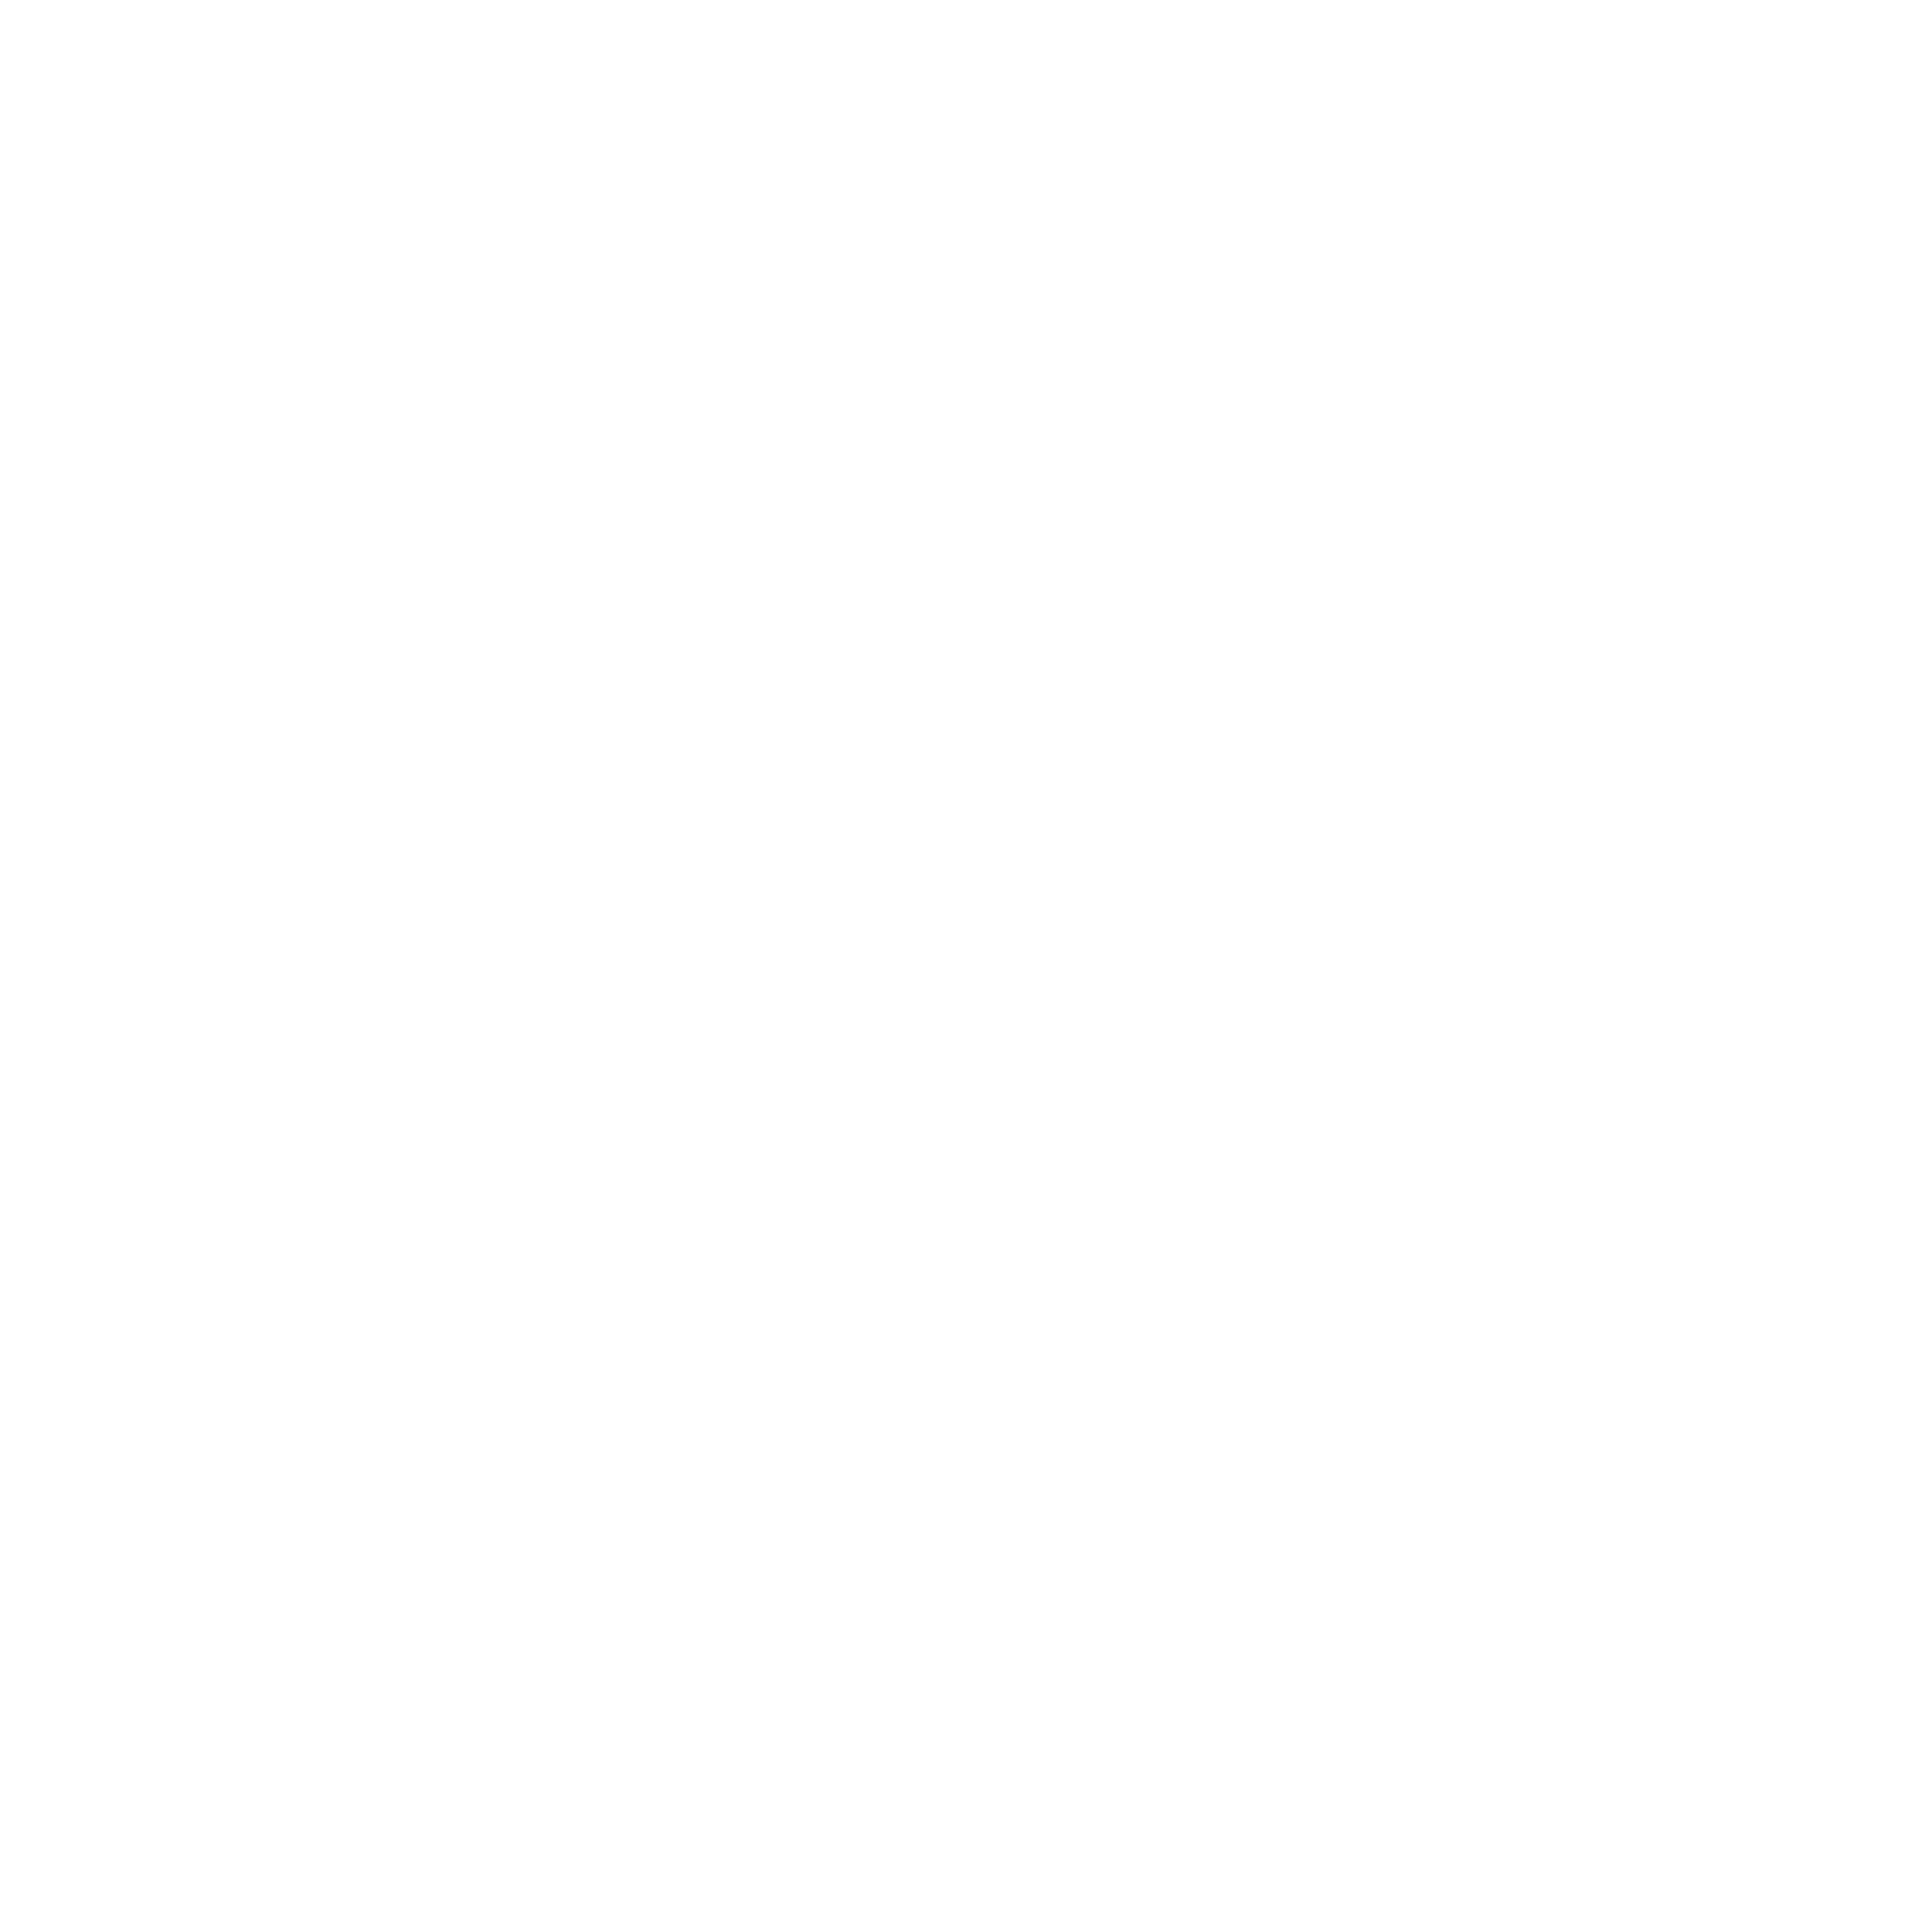 Feather + North